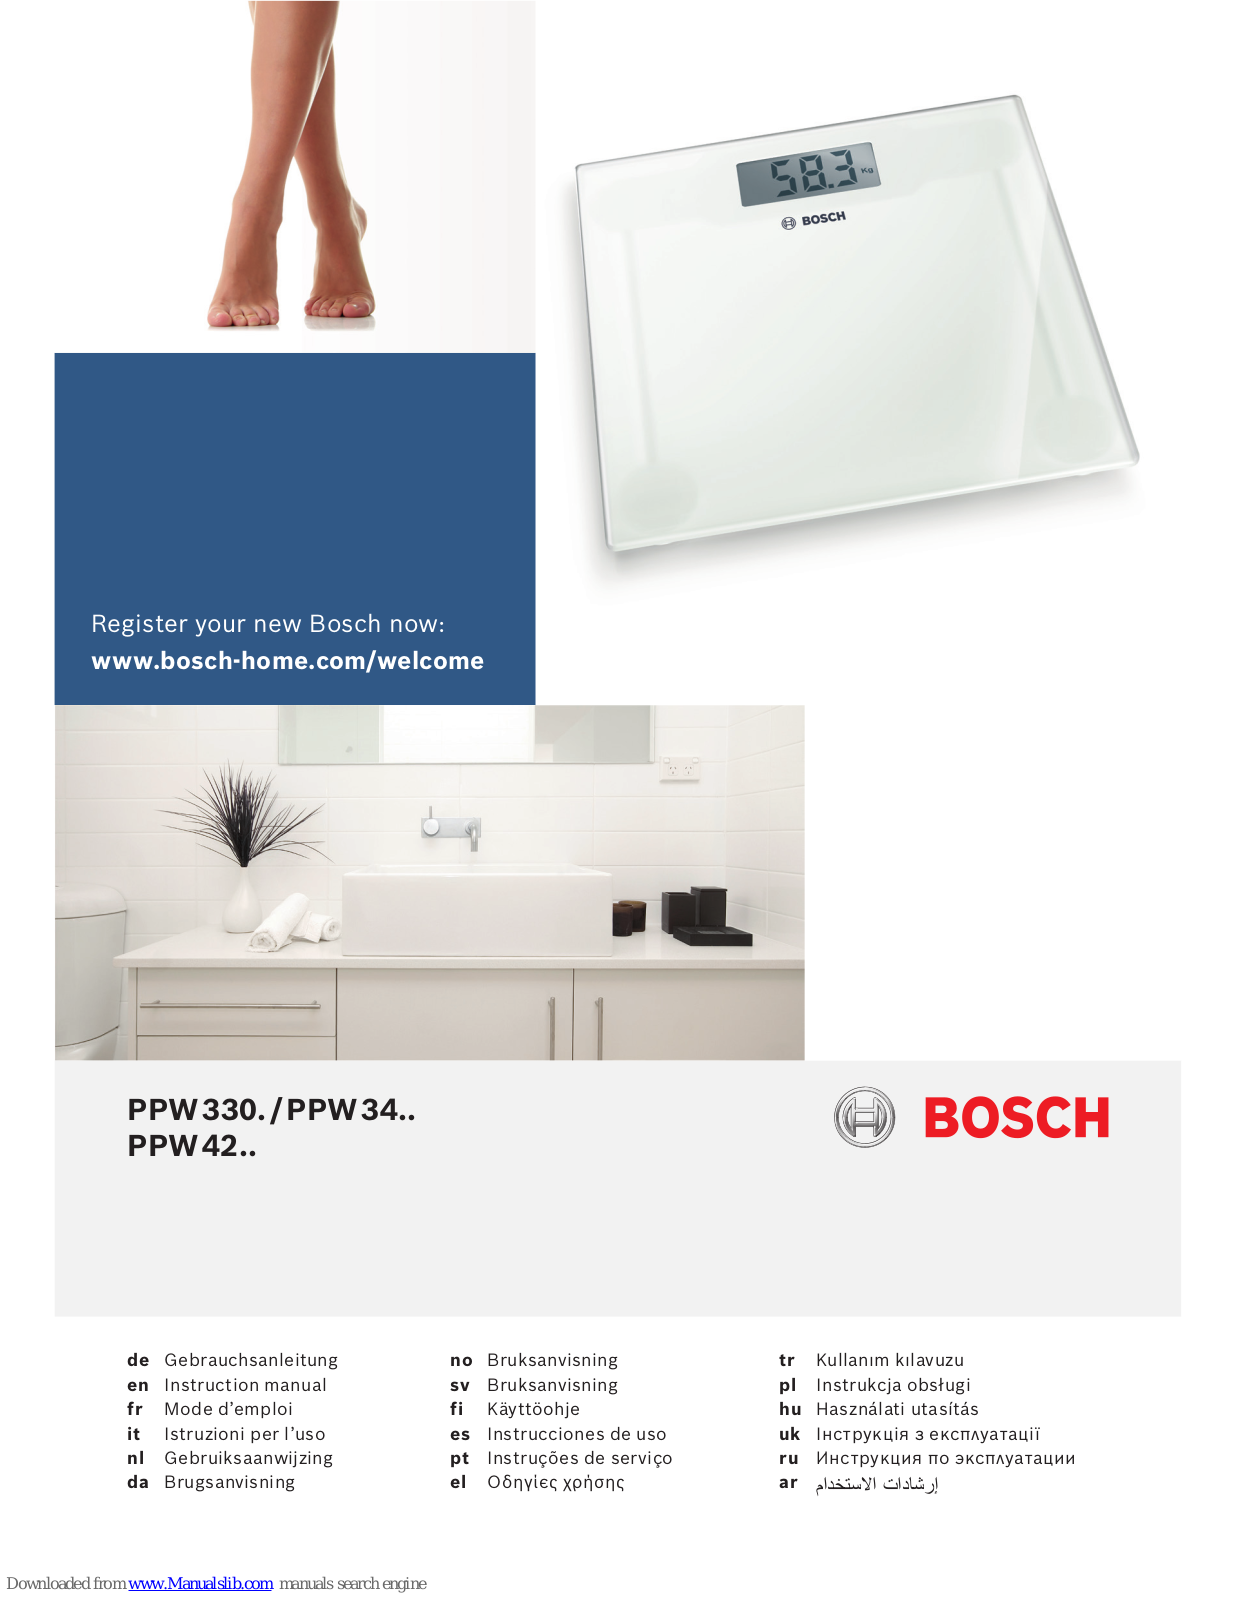 Bosch PPW330., PPW34, PPW42 Instruction Manual